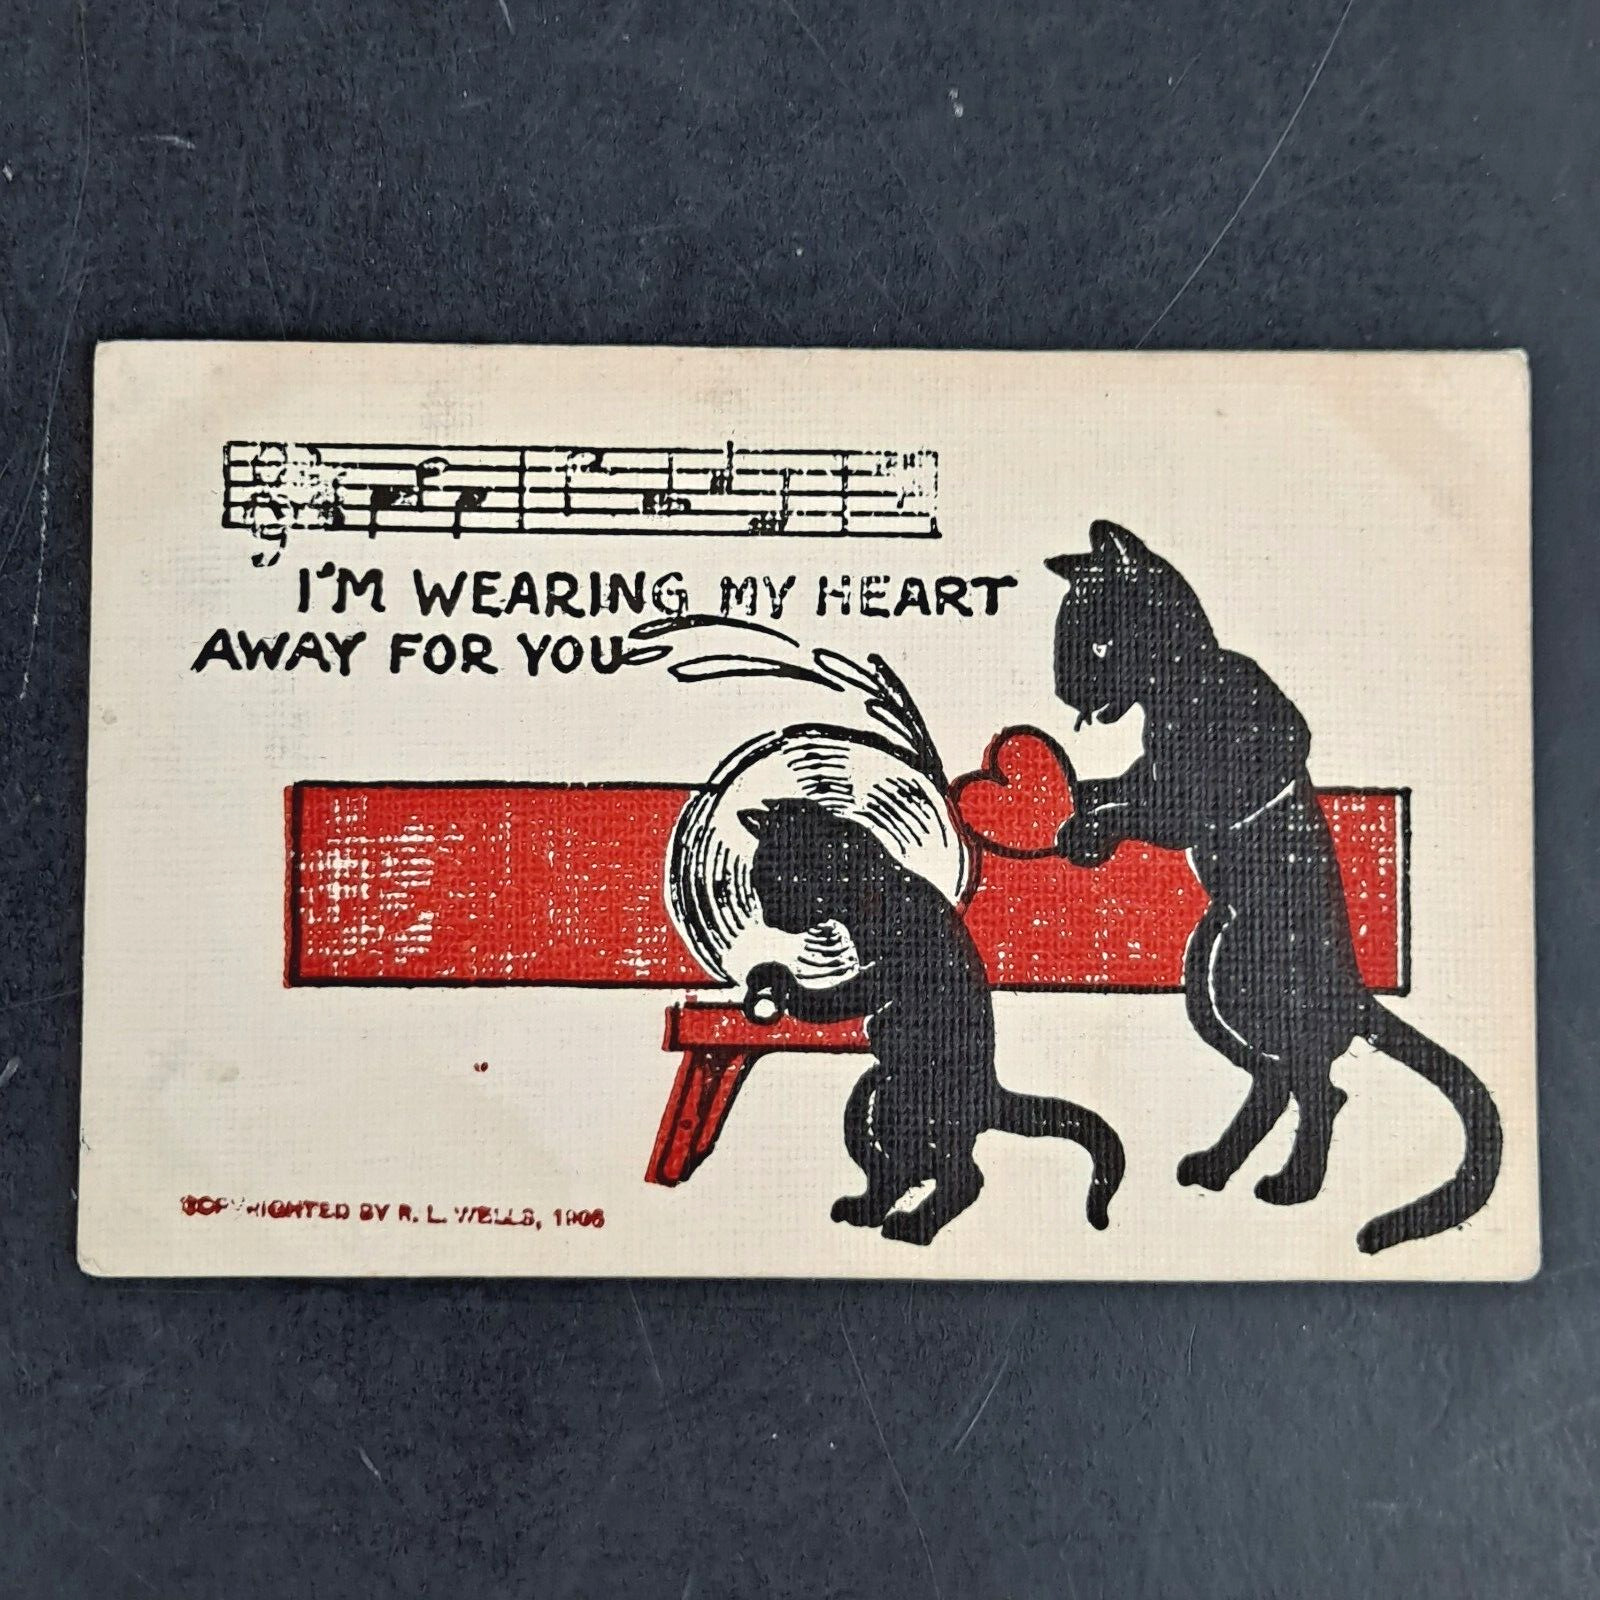 1906 R.L. WELLS POST CARD VALENTINES DAY LITHO ANTHROMOPHORPIC CATS POSTED 1909